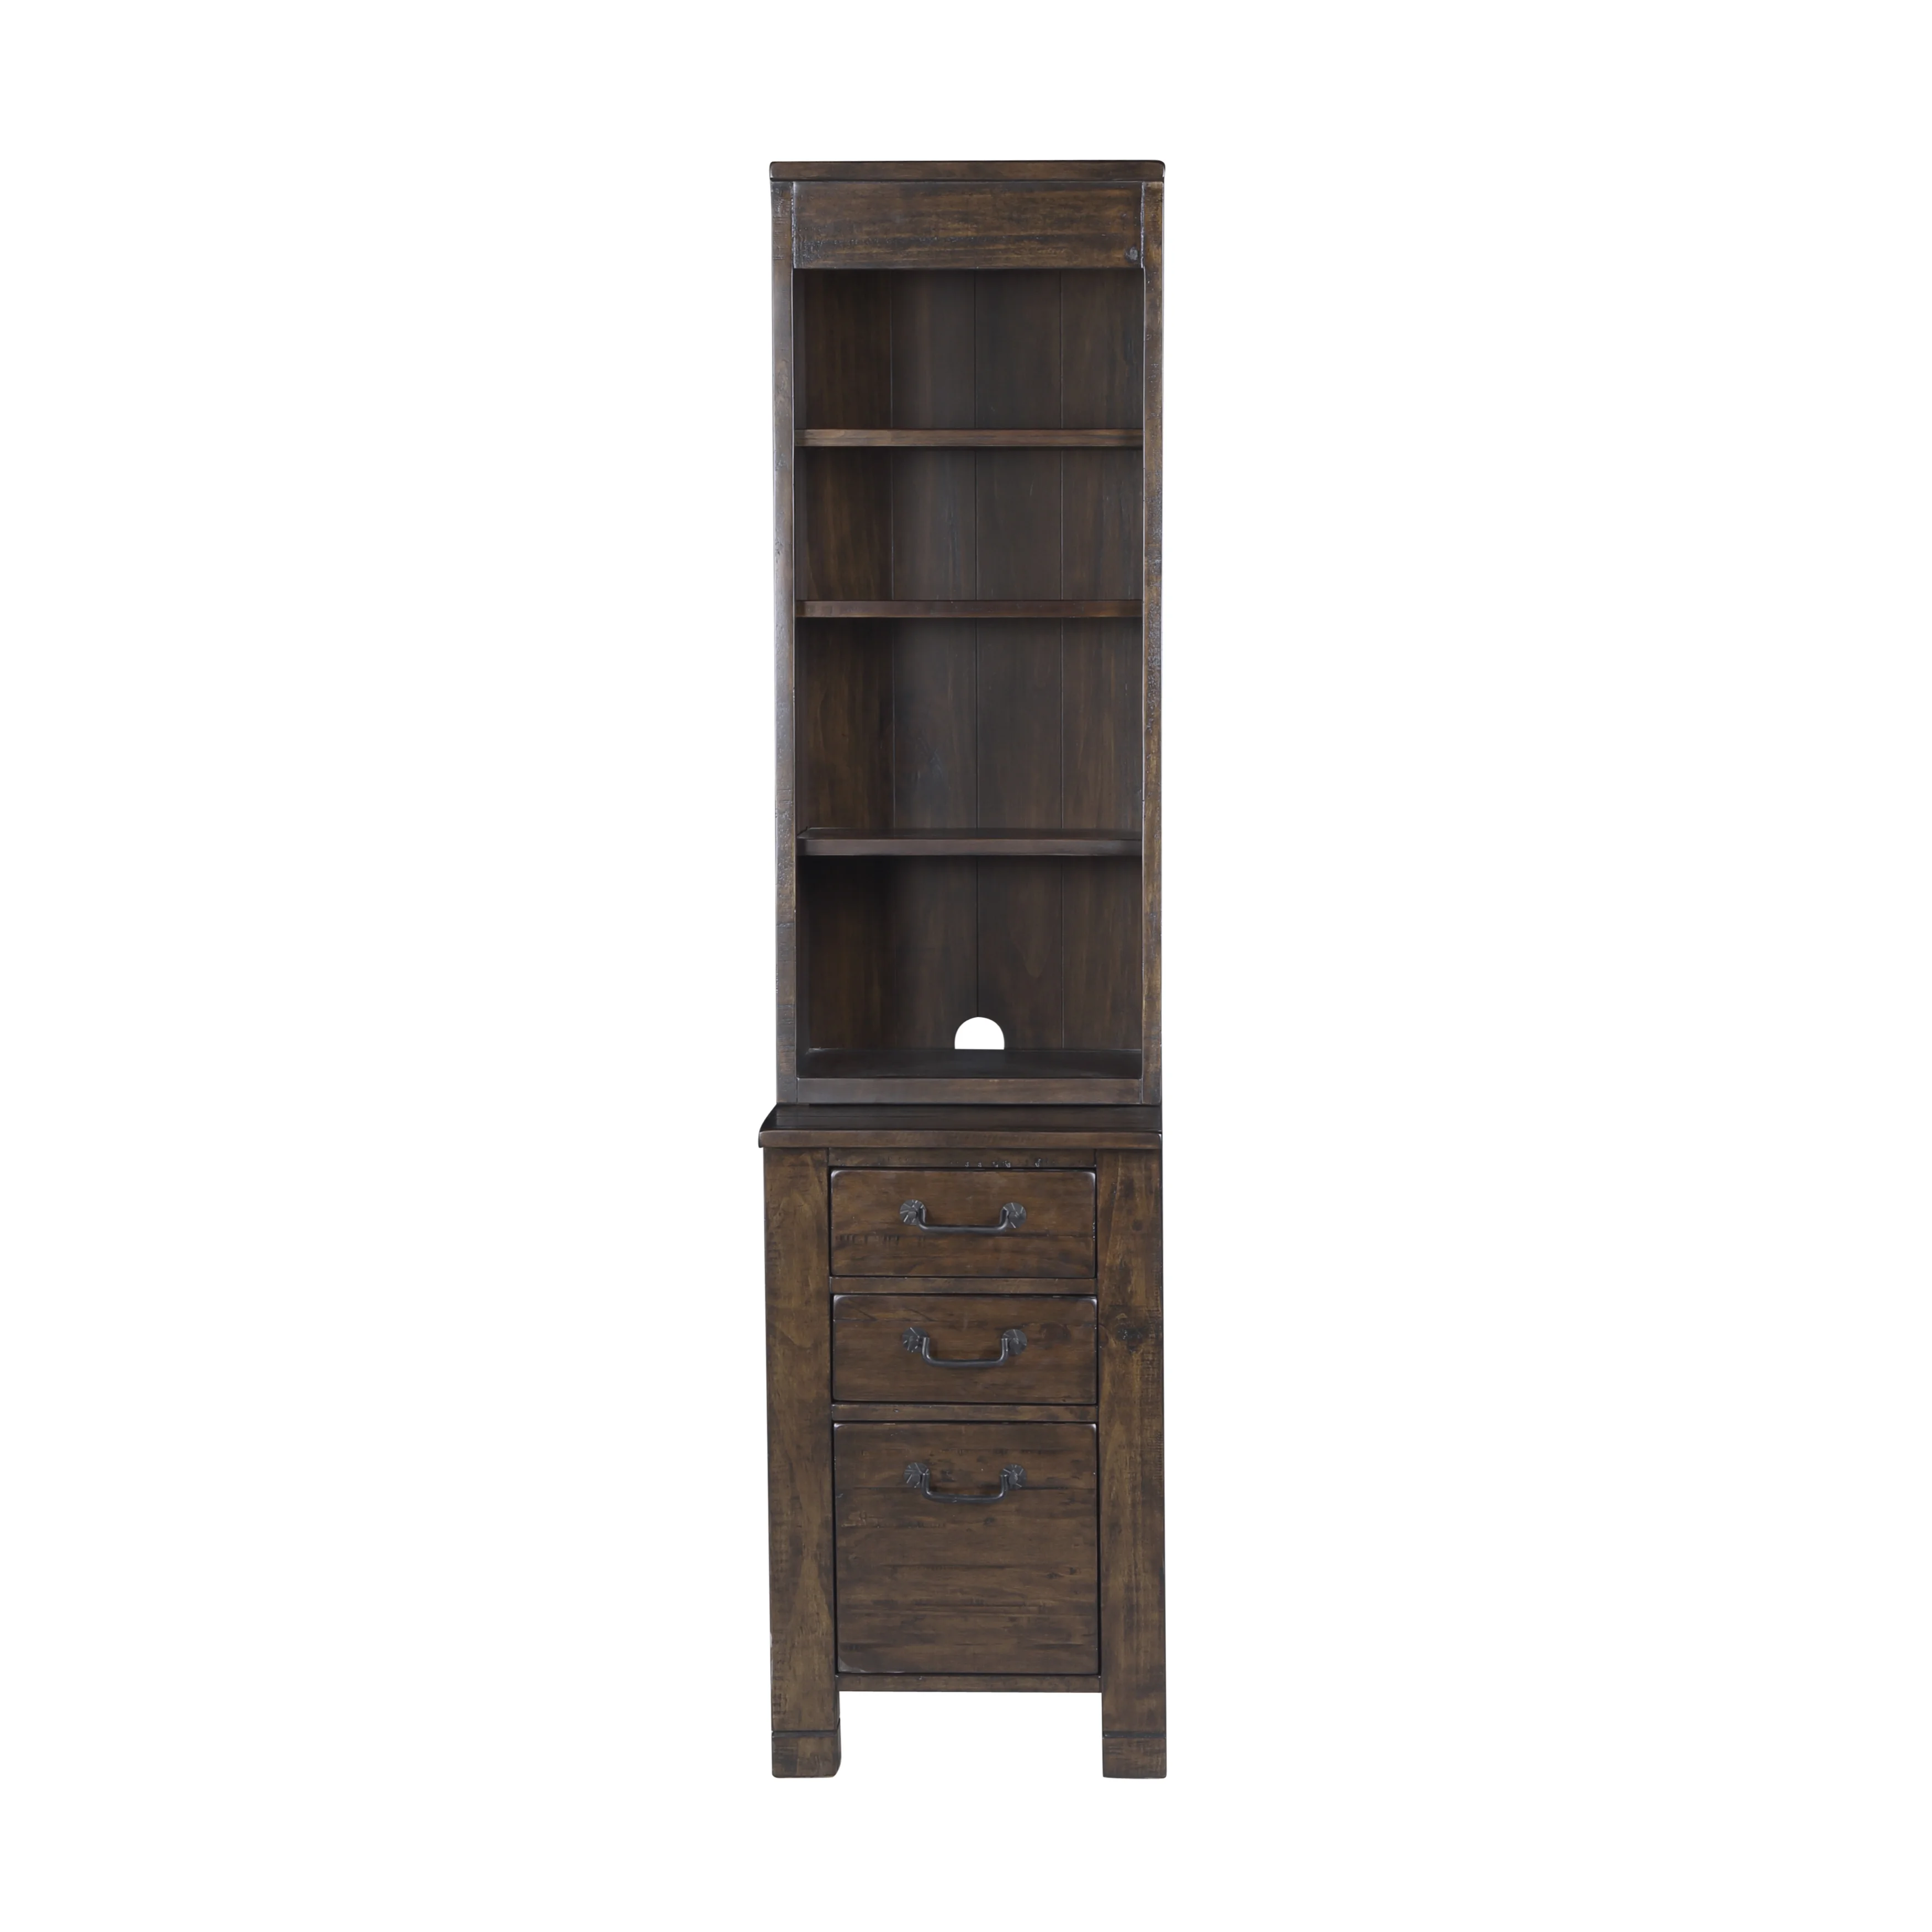 Silver Orchid Bowers Bunching Rustic Pine Cabinet Bookcase